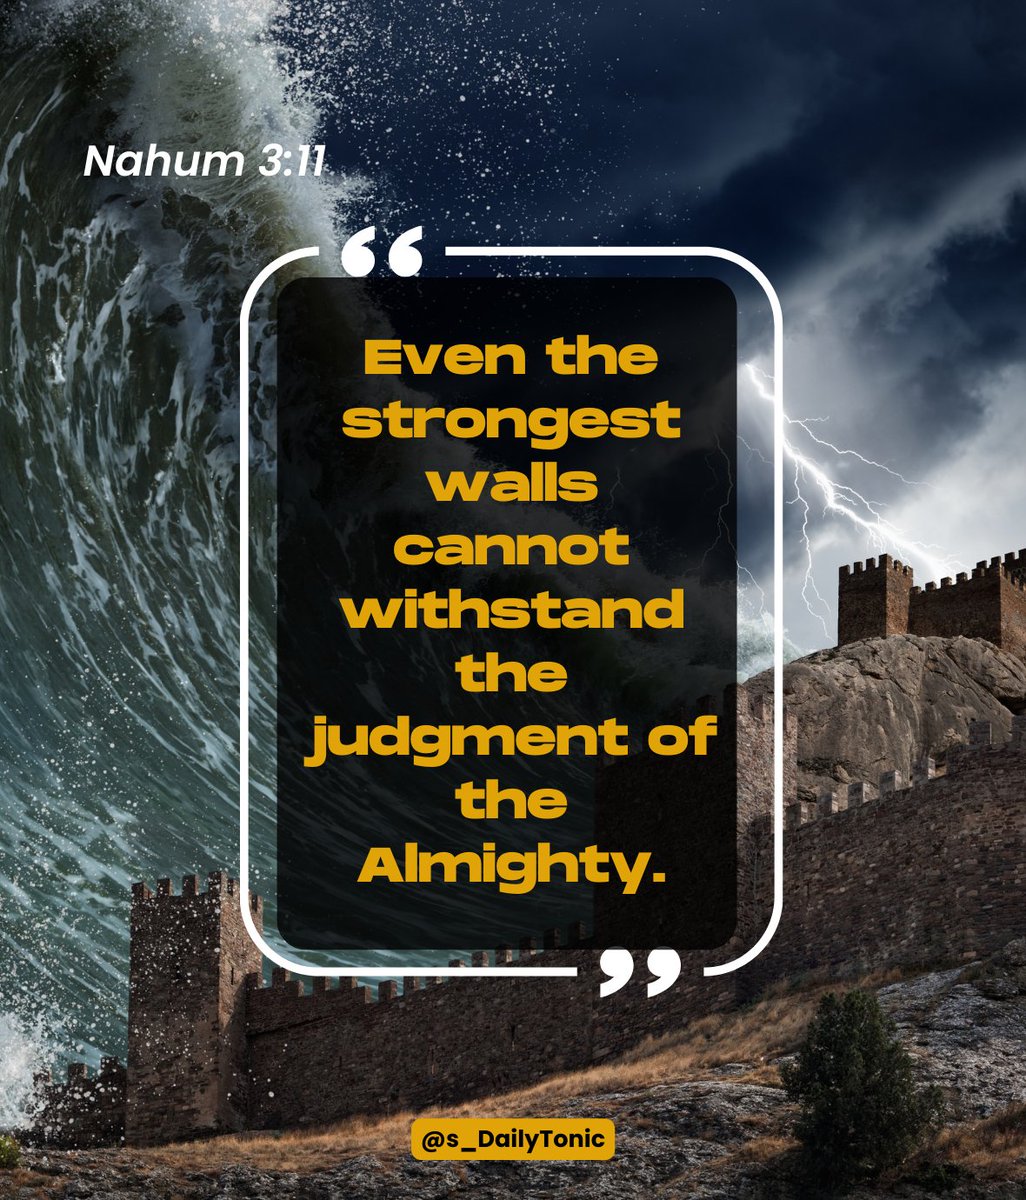 Even the strongest walls can't withstand the judgment of the Almighty. Let's put our faith in God and trust in His strength to overcome any obstacle. With God on our side, all things are possible! #FaithOverFear #TrustInGod #GodsStrength #NeverGiveUp